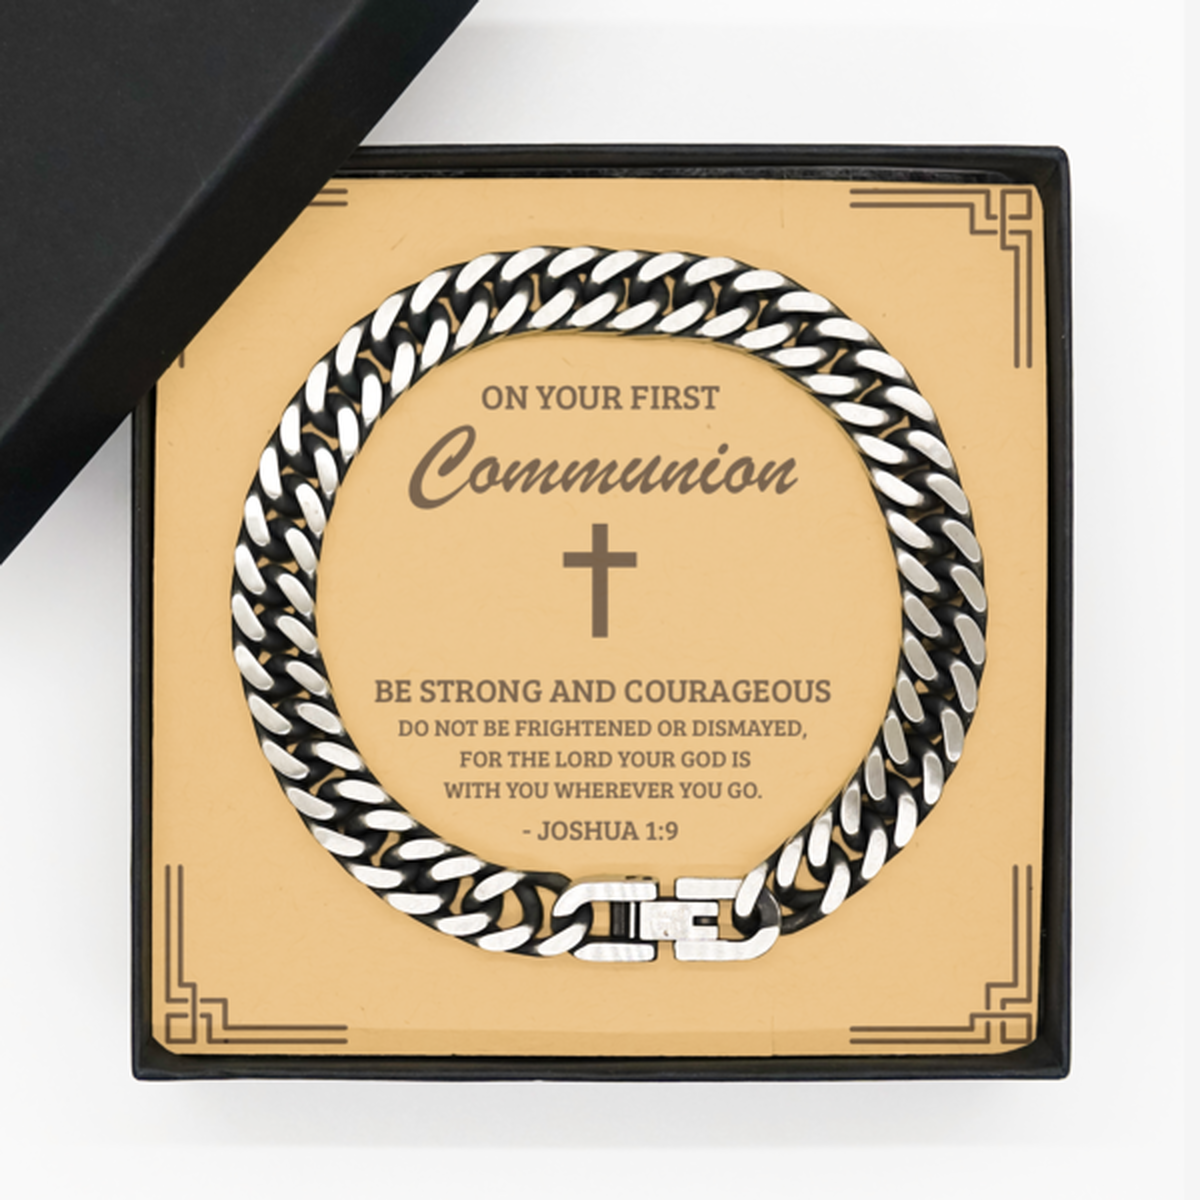 First Communion Gifts for Teenage Boys, Be strong and courageous, Cuban Link Chain Bracelet with Bible Verse Message Card, Religious Catholic Bracelet for Son, Grandson, Dad, Godfather